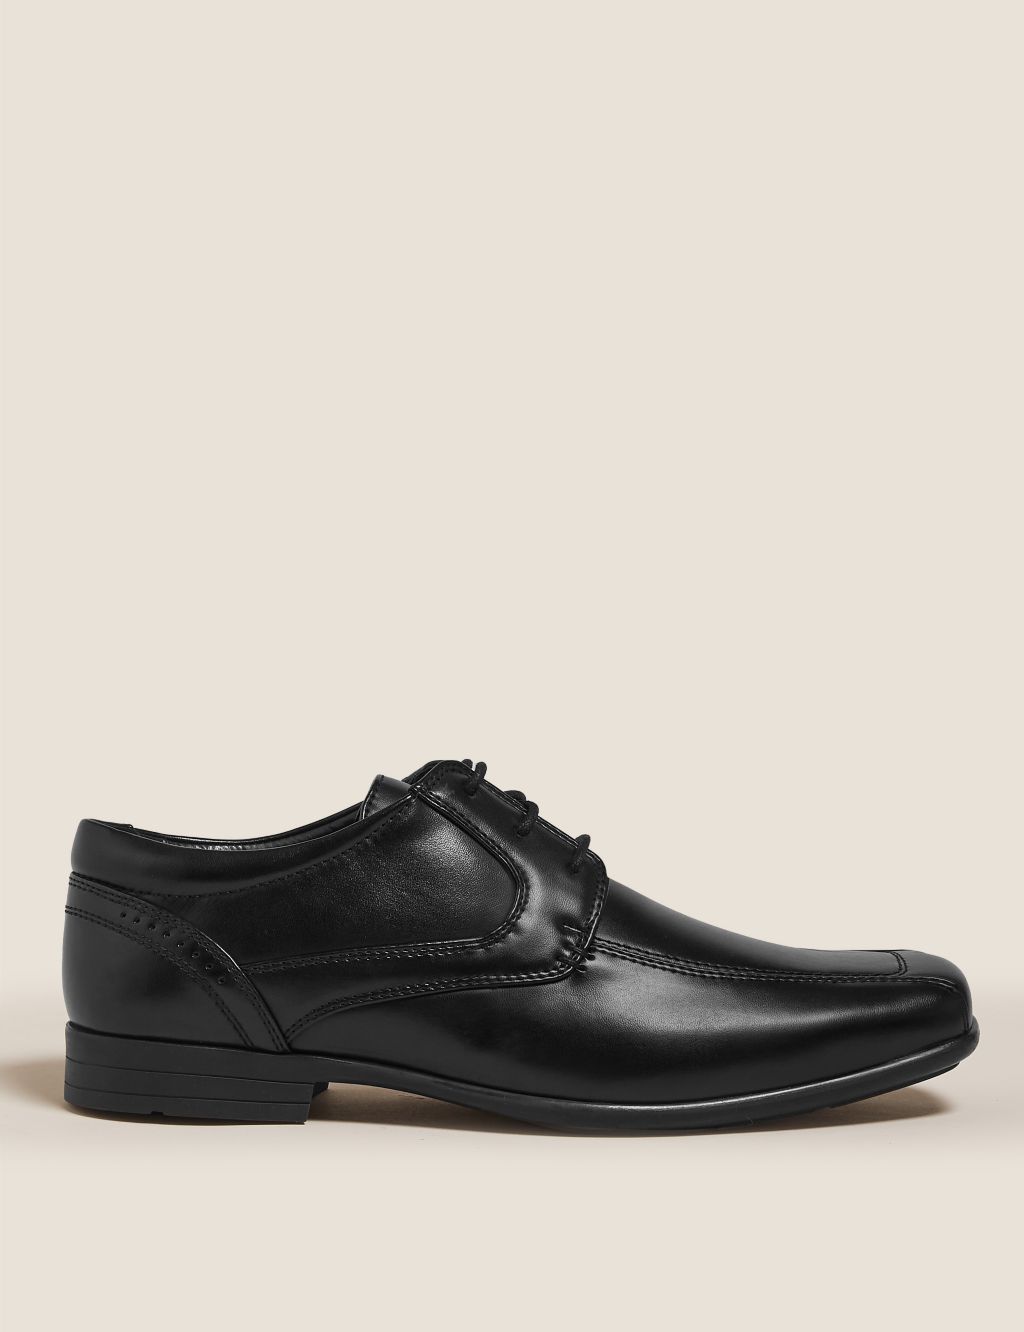 Derby Shoes image 1